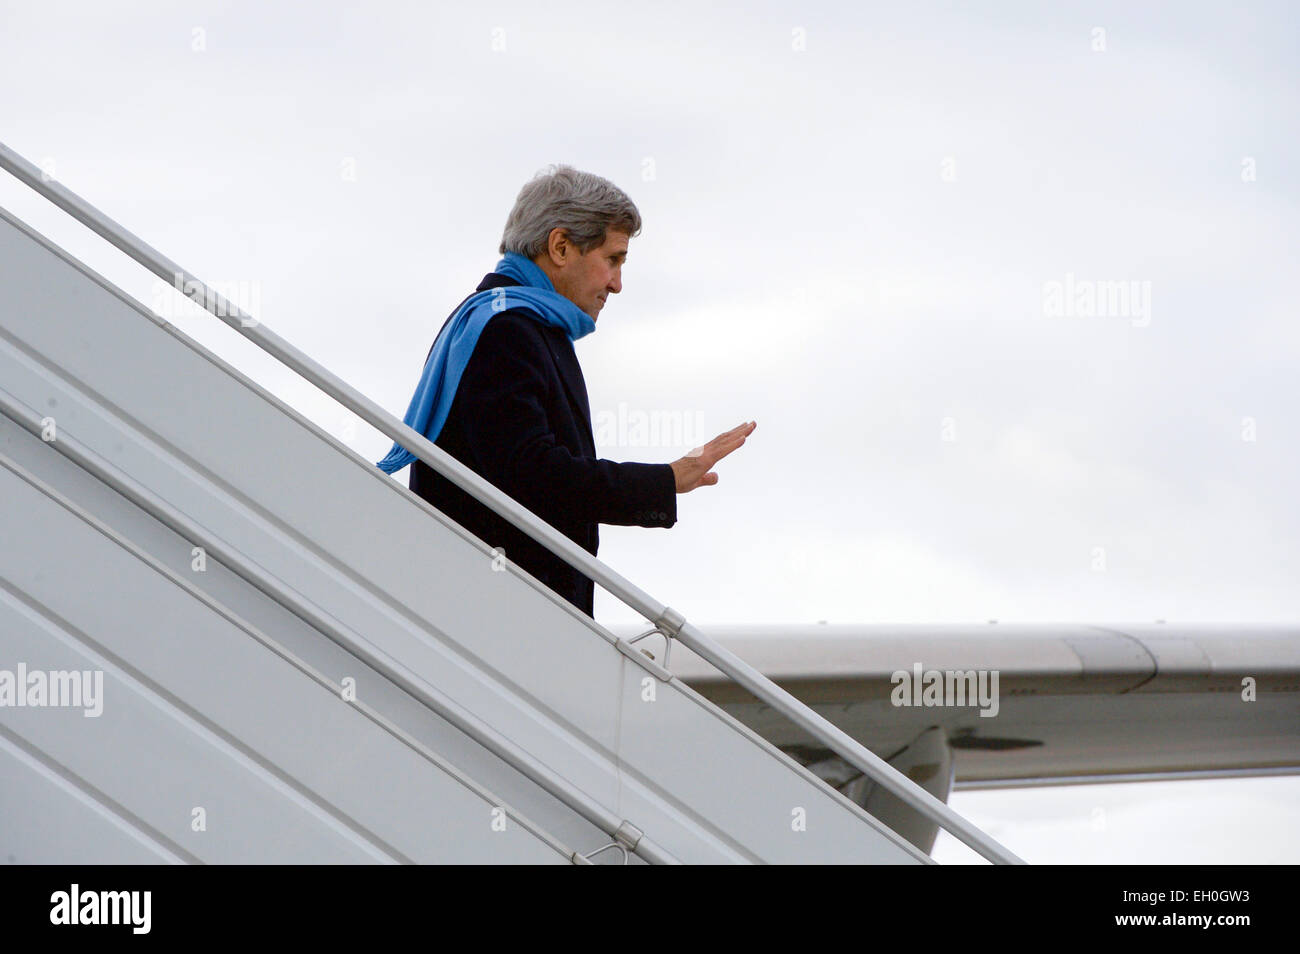 U.S. Secretary of State John Kerry waves to a group of greeters as he arrives in Geneva, Switzerland, on February 22, 2015, for a round of talks with Iranian officials about the future of their nuclear program. Stock Photo